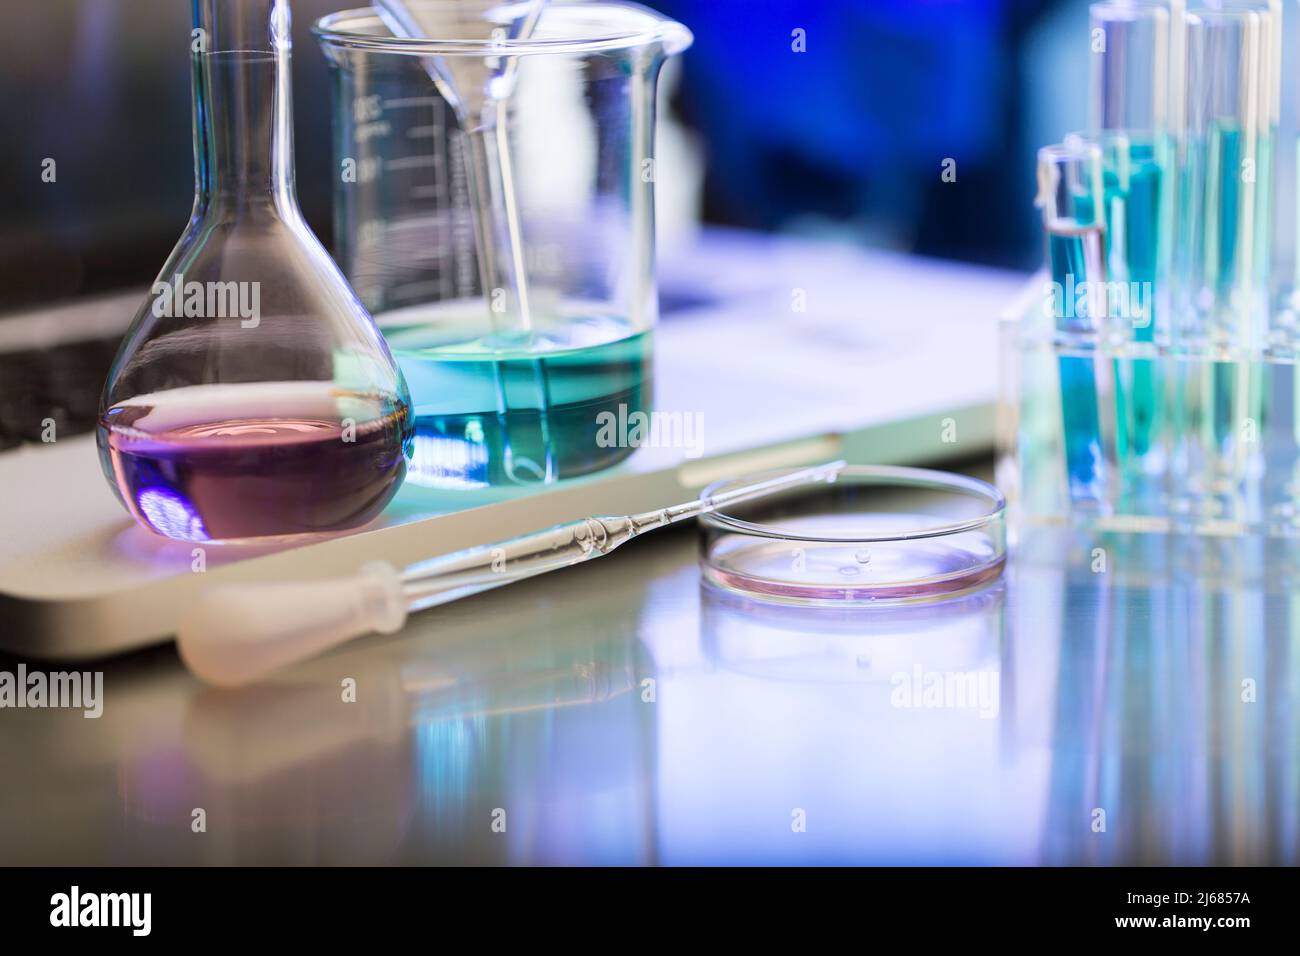 Group of object, dropper, conical flask, beaker, funnel, Petri dish, test tube, laptop - stock photo Stock Photo